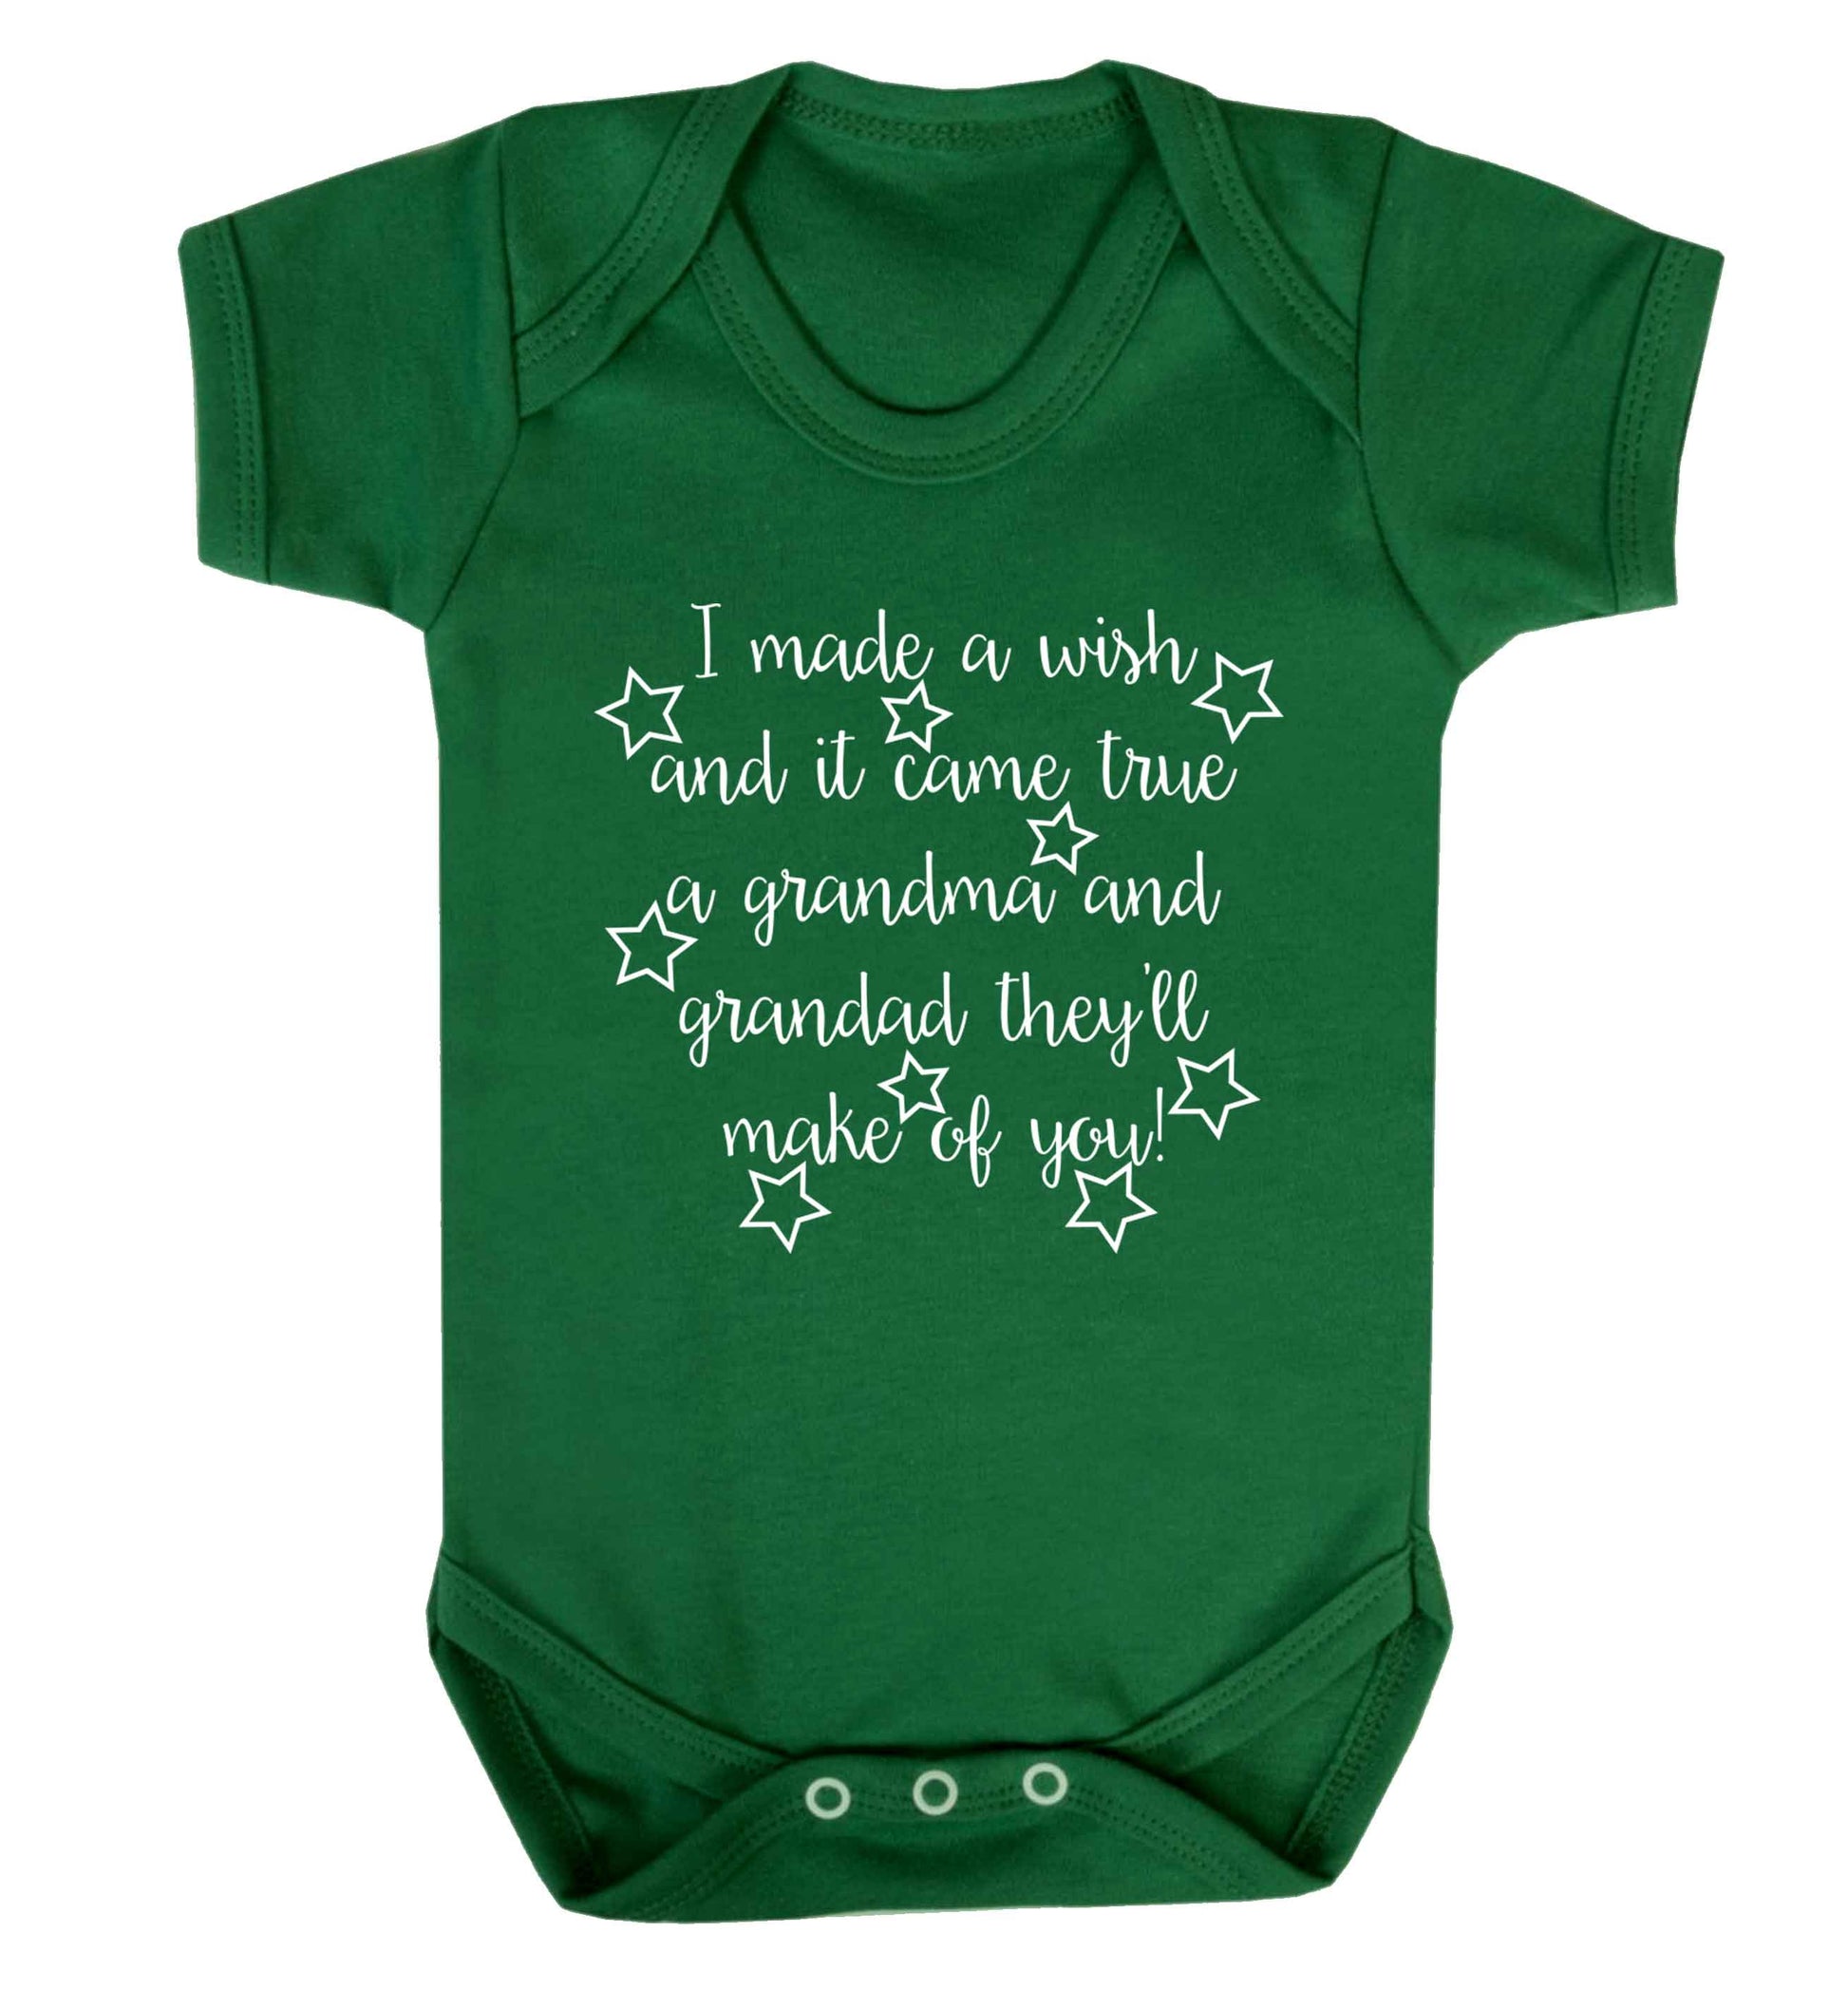 I made a wish and it came true a grandma and grandad they'll make of you! Baby Vest green 18-24 months